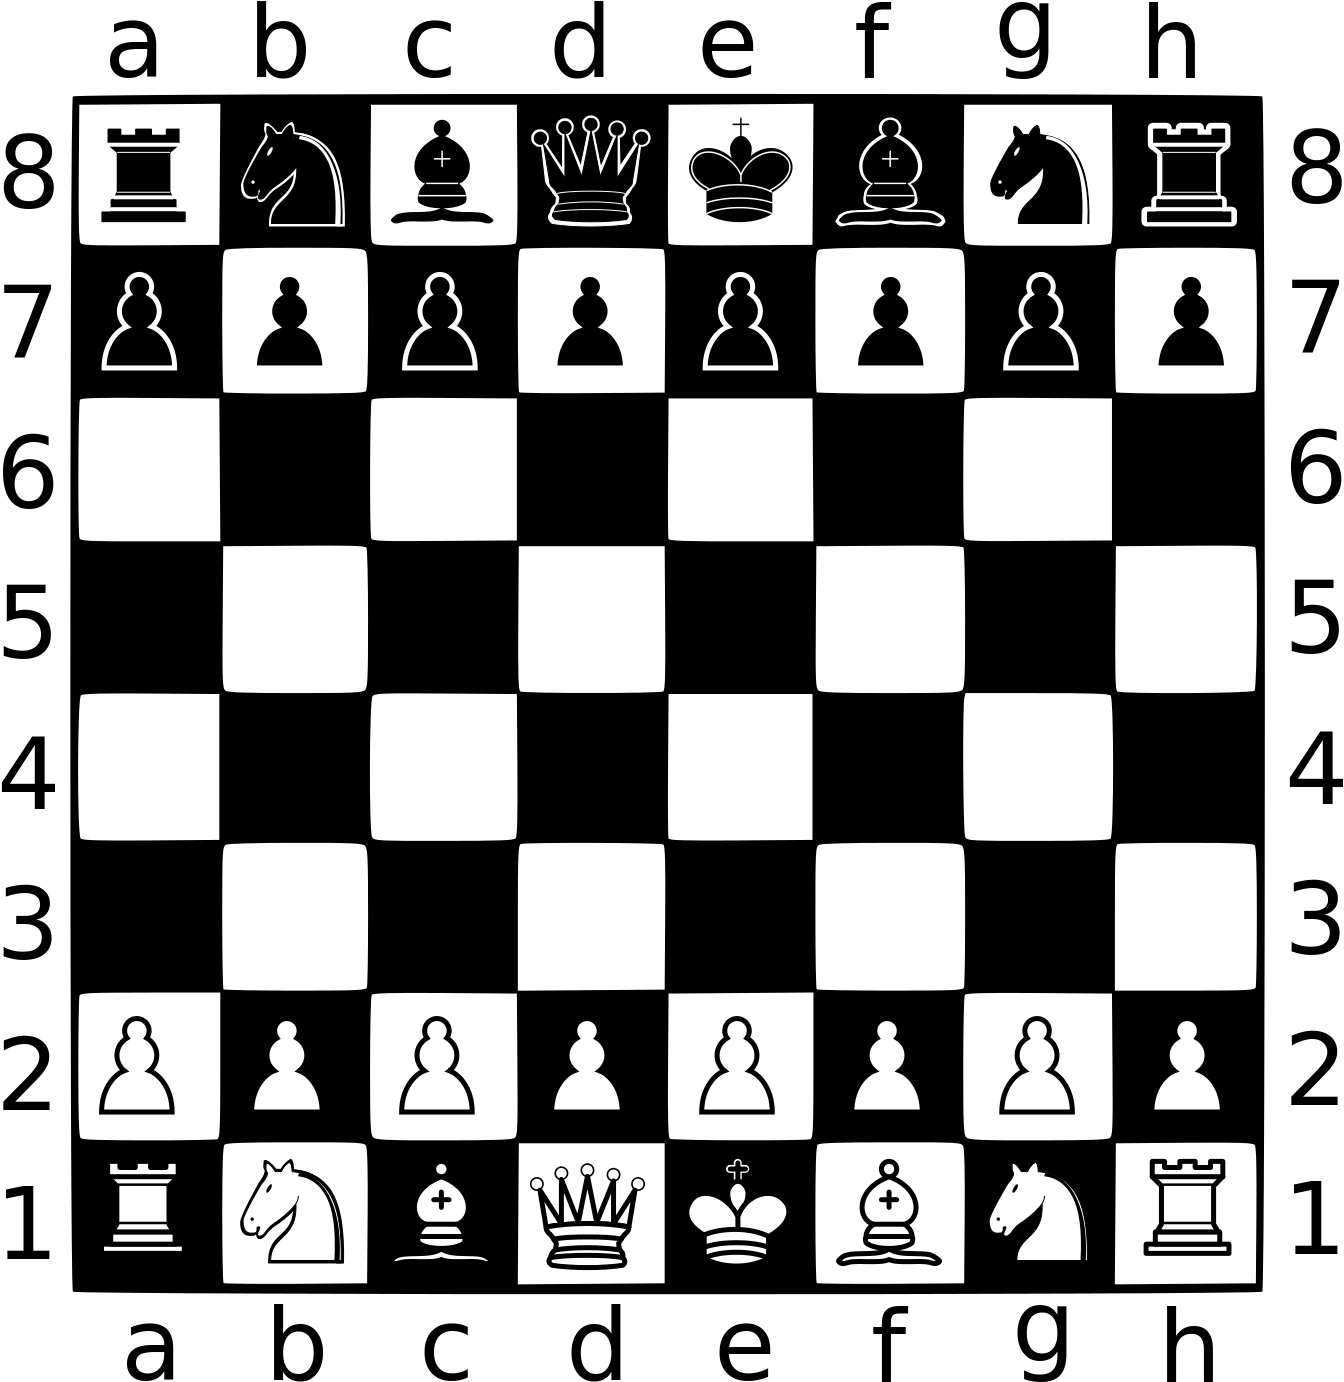 Chessboard Initial Setup PNG image